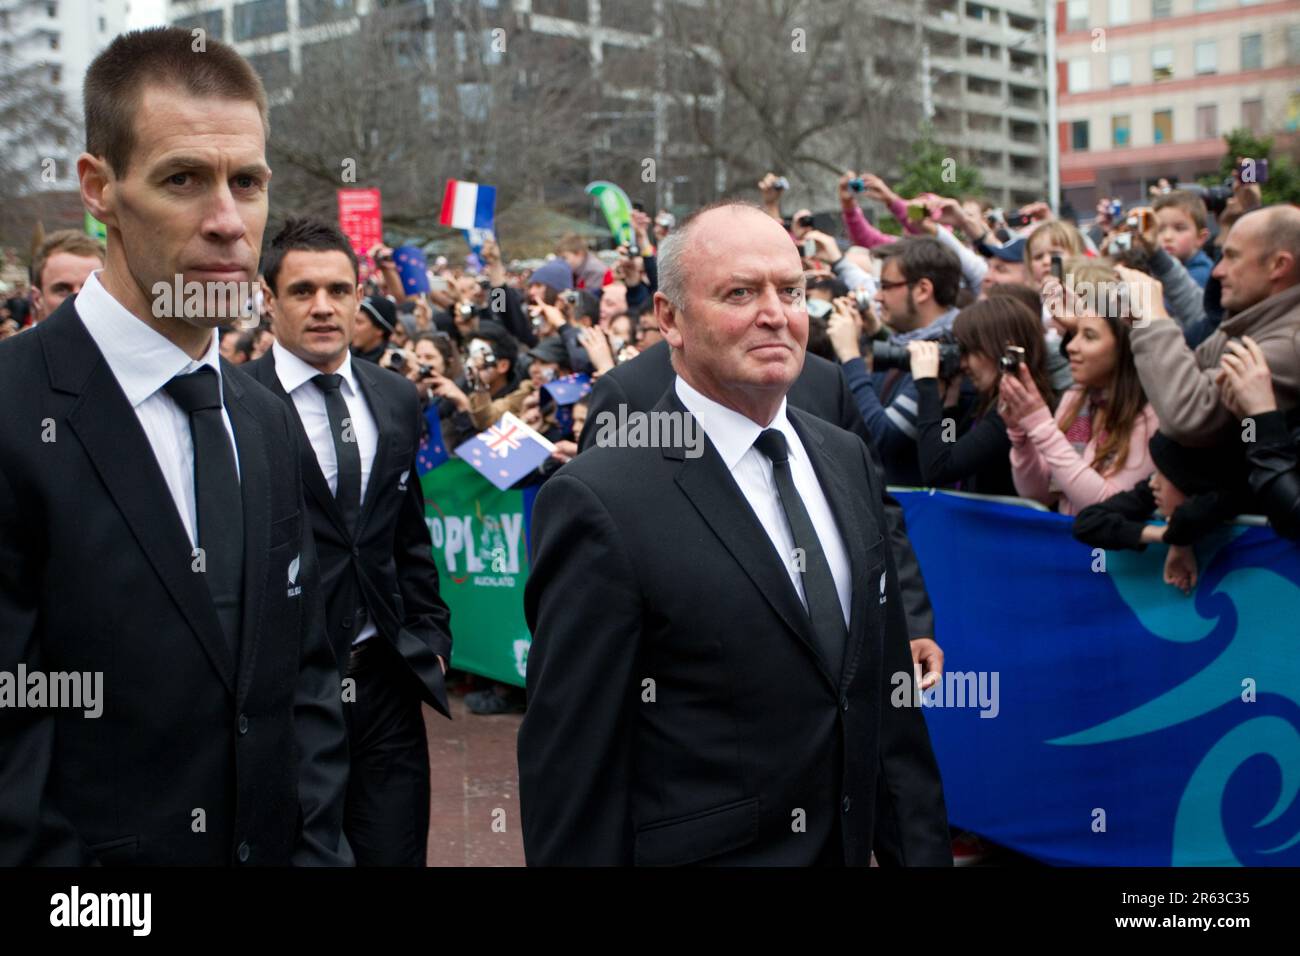 Manager Darren Shand, left, Dan Carter and coach Graham Henry make their way to the stage for the official welcome for the New Zealand Rugby World Cup Team, Aotea Square, Auckland, New Zealand, Saturday, September 03, 2011. Stock Photo